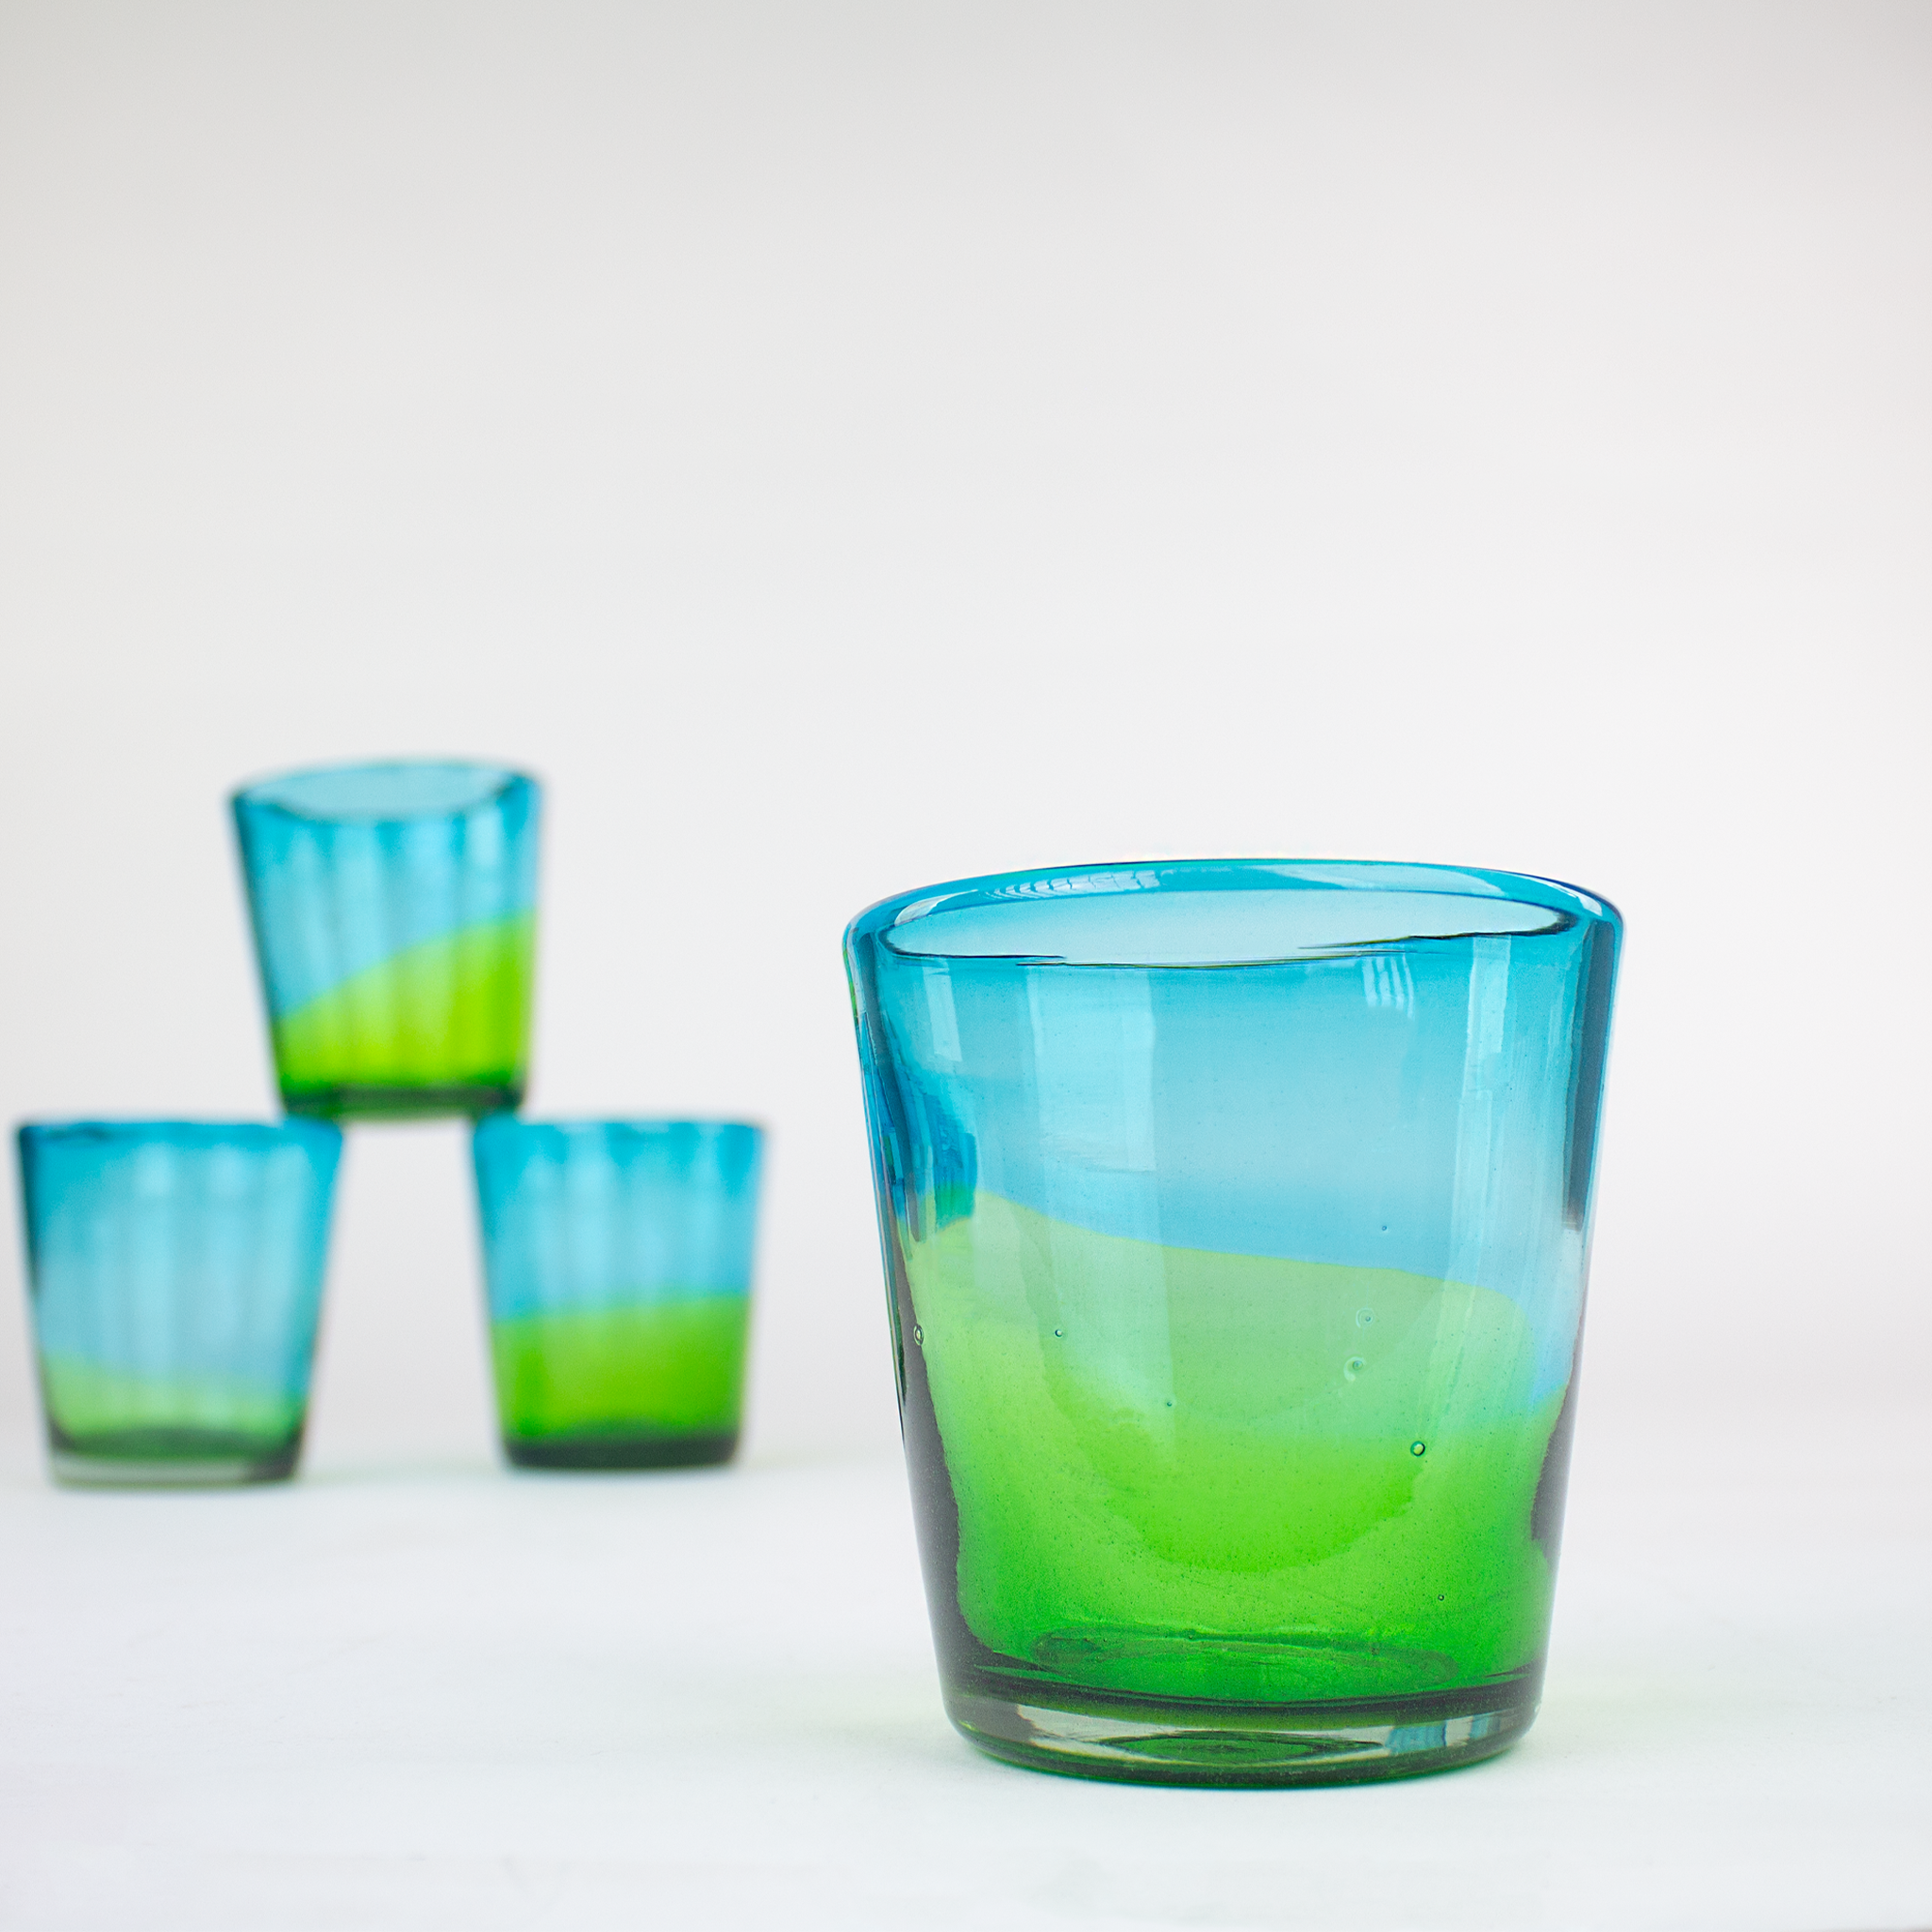 Hand-blown glass tumblers, aqua and lime glass cups.